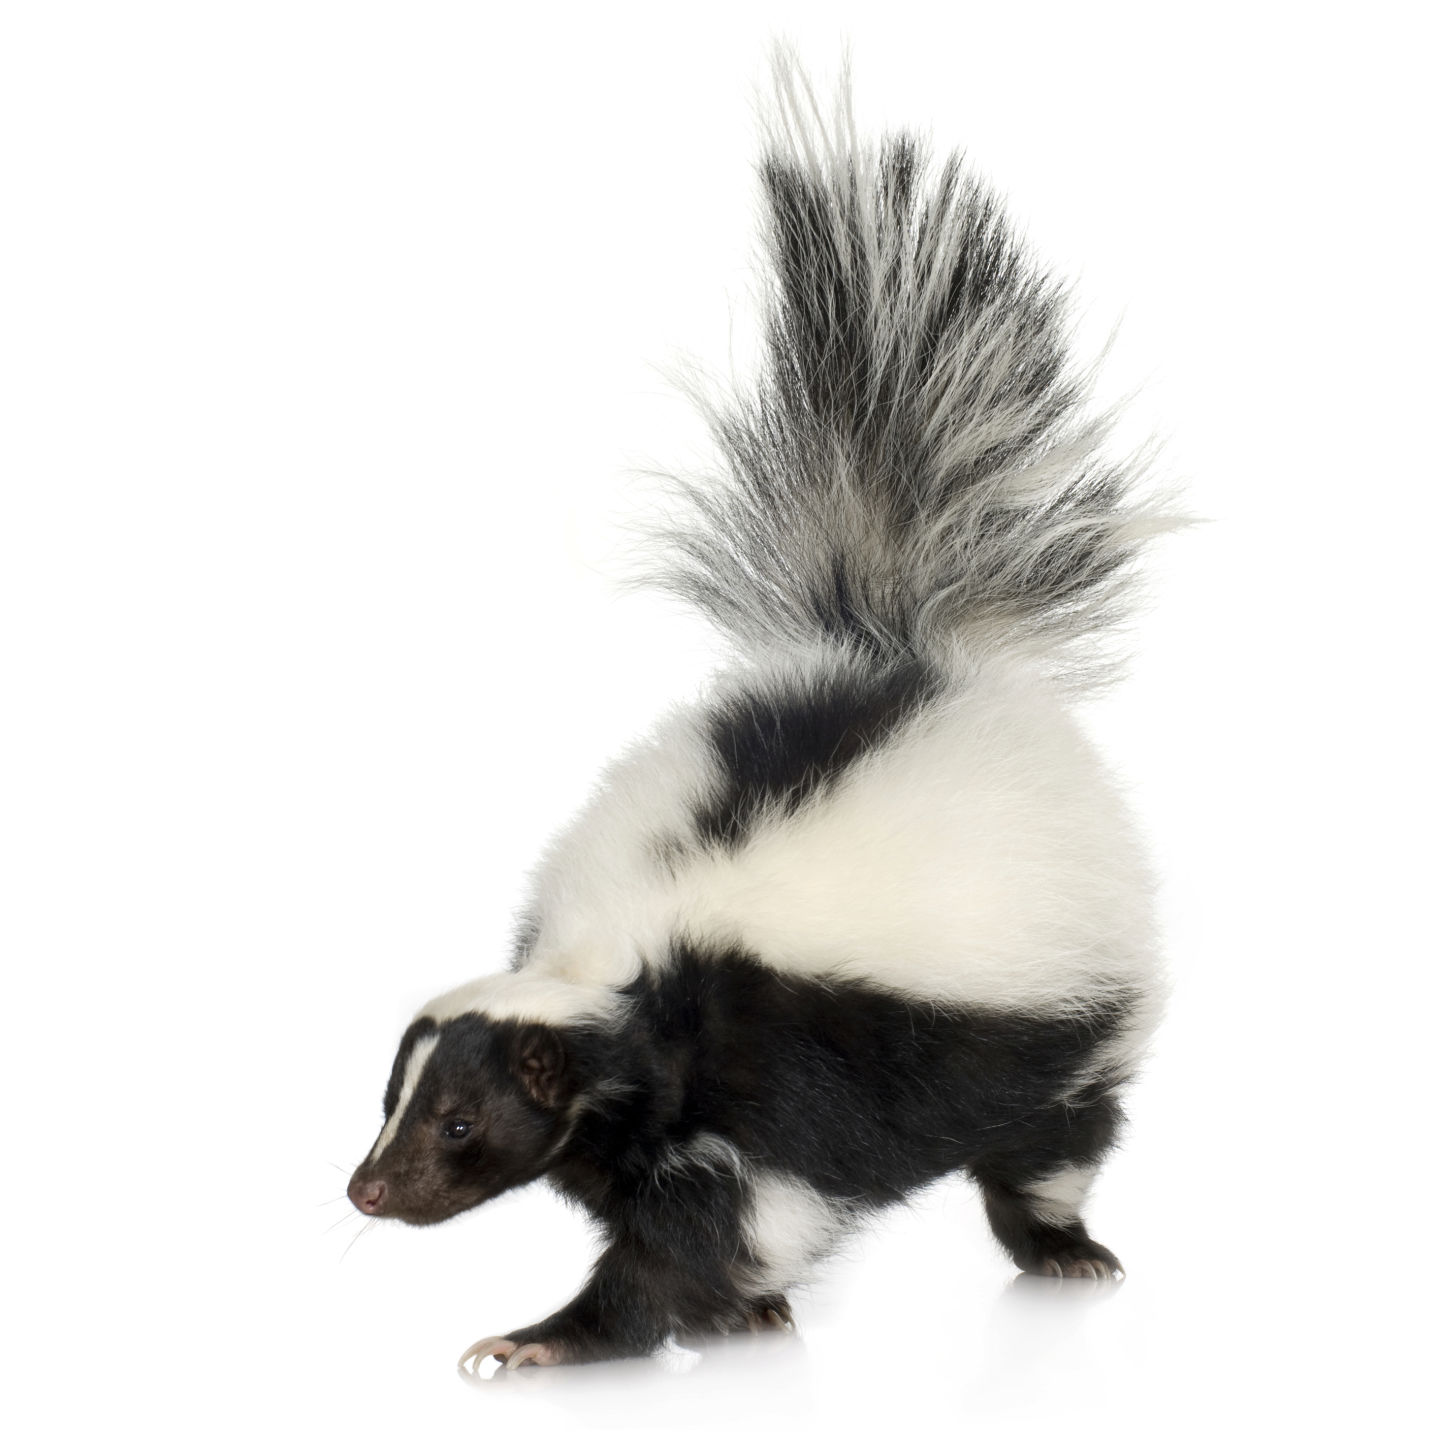 Warning to vaccinate pets issued after rabid skunk found in Black Forest News gazette